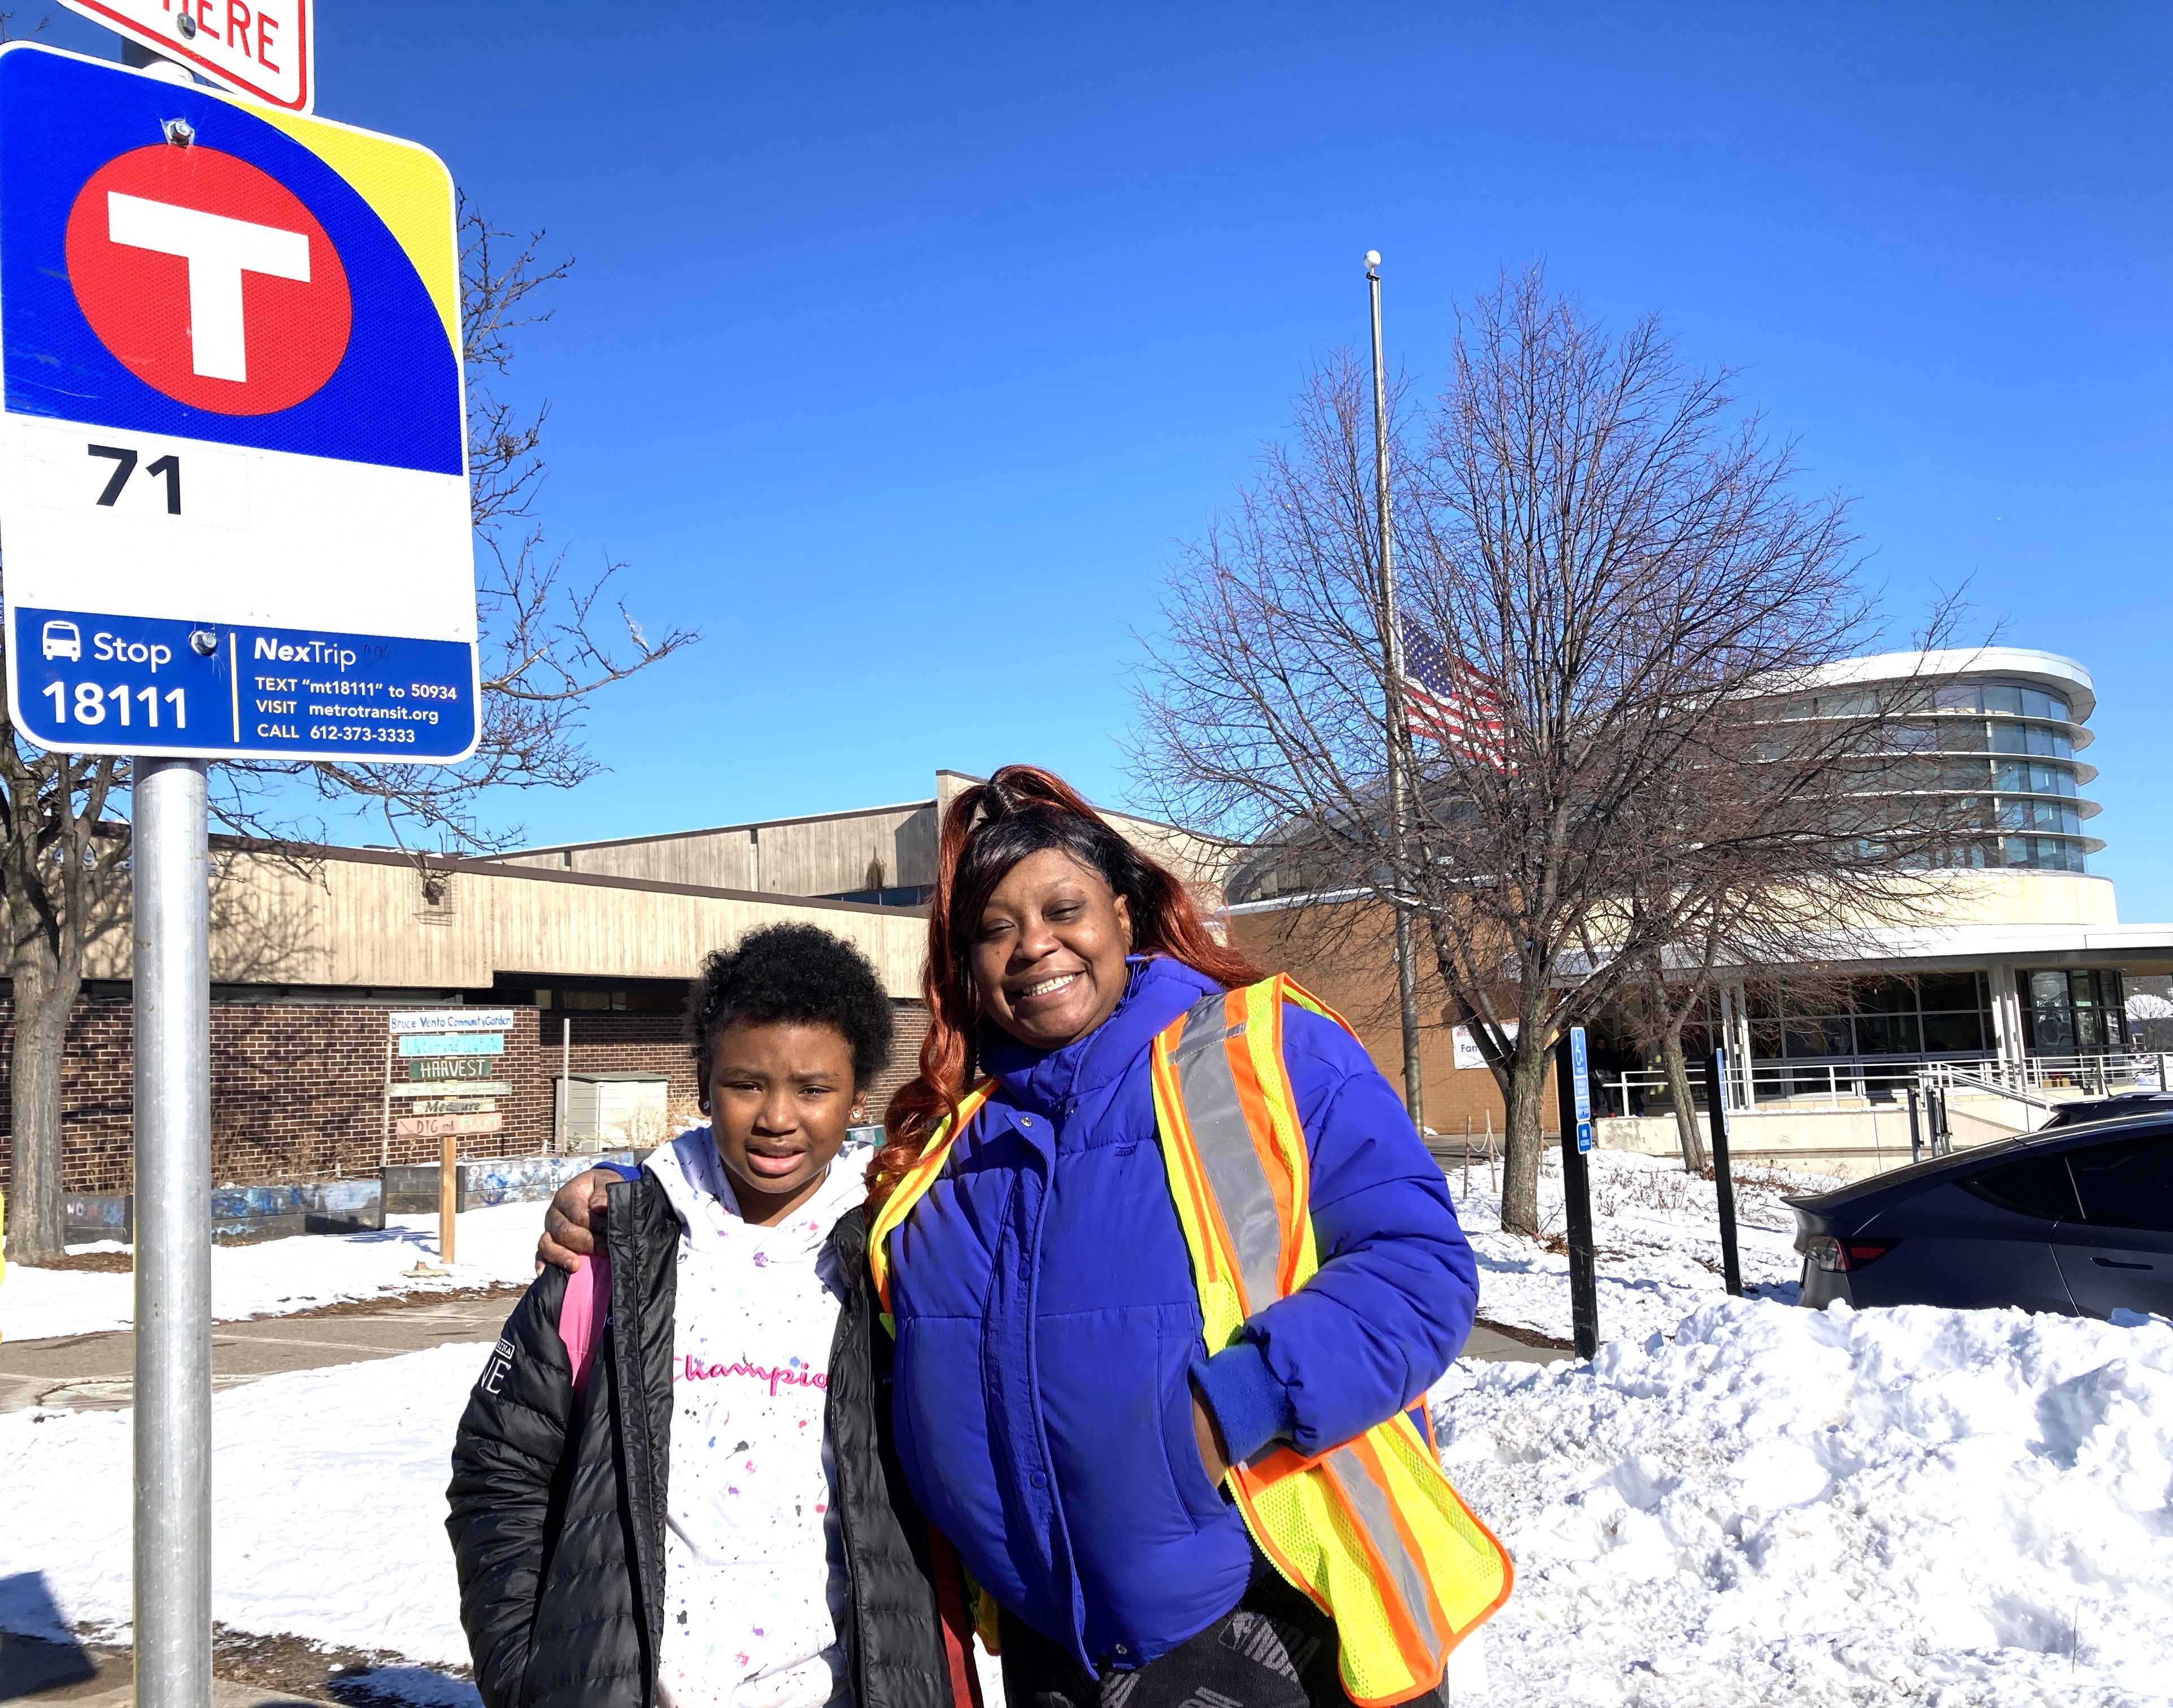 Keshawn and Josephine Williams at the bus stop they adopted near Bruce Vento Elementary School.